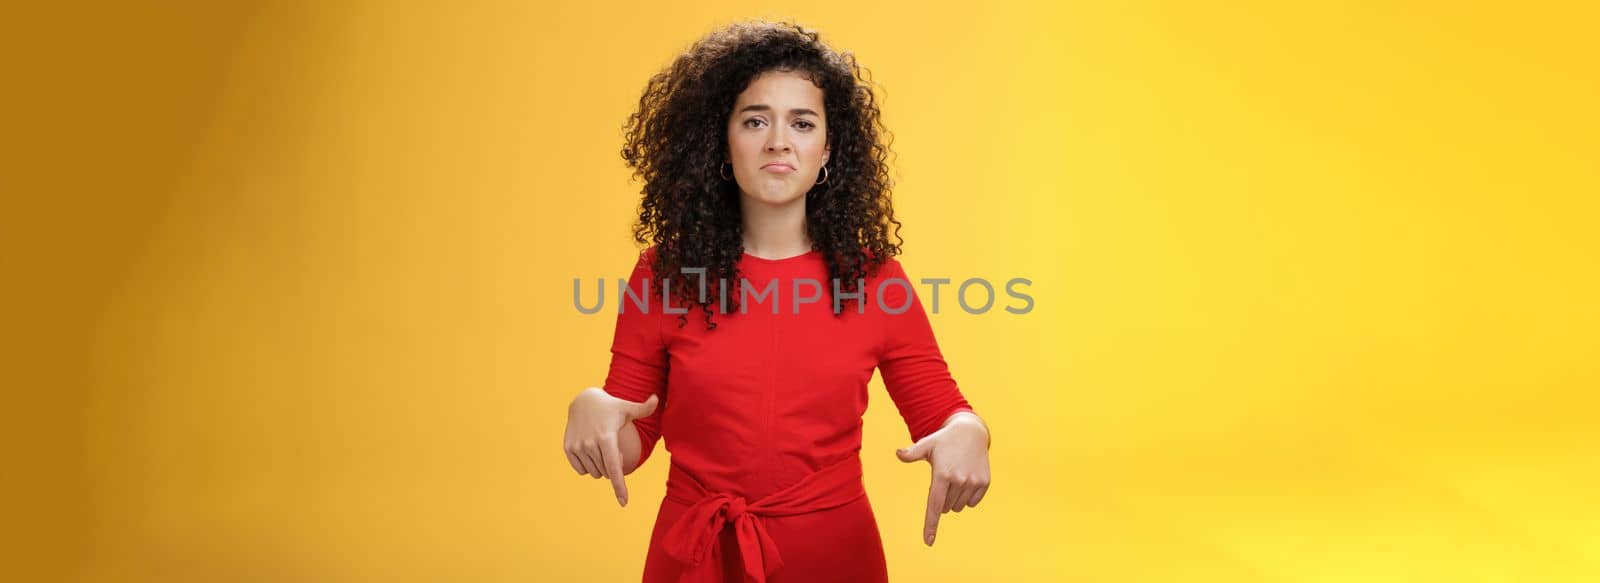 Portrait of gloomy girl with sad face pursing lips down frowning disappointed and pointing down with regret and unsatisfied expression, missing opportunity feeling upset over yellow background.